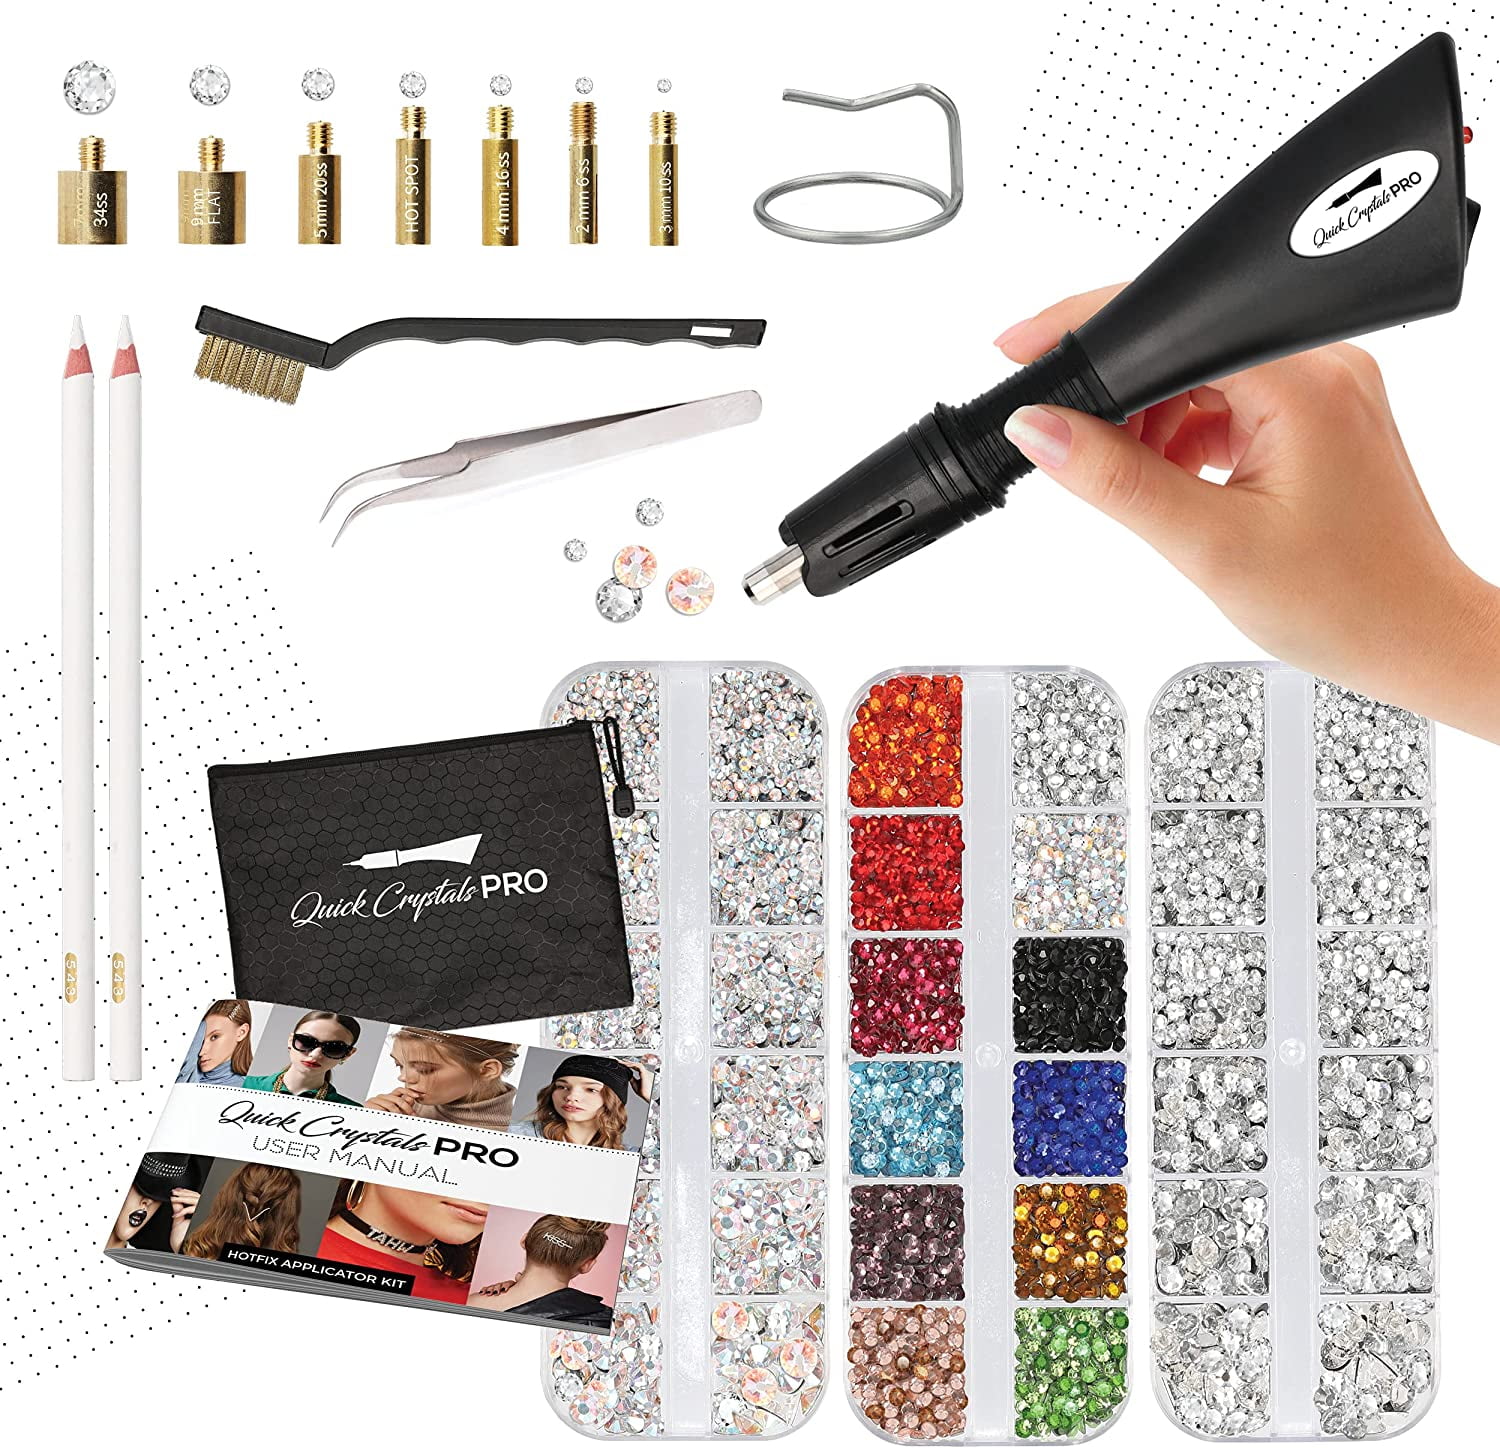 Quick Crystals Pro Hotfix Applicator, Bedazzler Kit with Rhinestones, DIY  Wand Setter Tool Kit with 7 Different Tip Sizes, Tweezers, Cleaning Brush